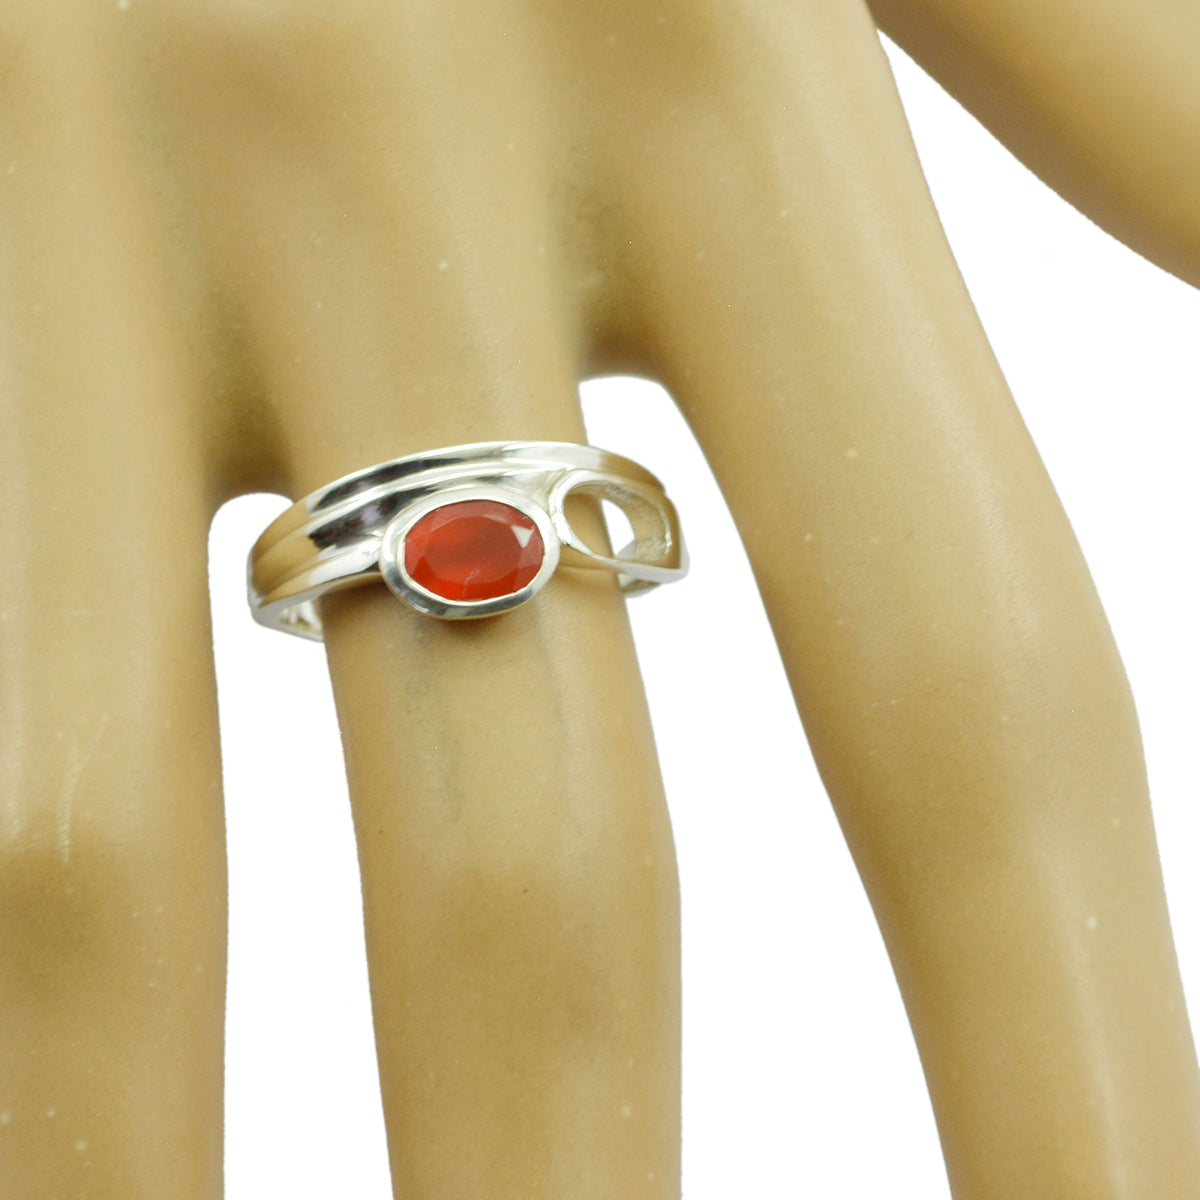 Statuesque Gemstone Red Onyx 925 Sterling Silver Ring Hiphop Jewelry